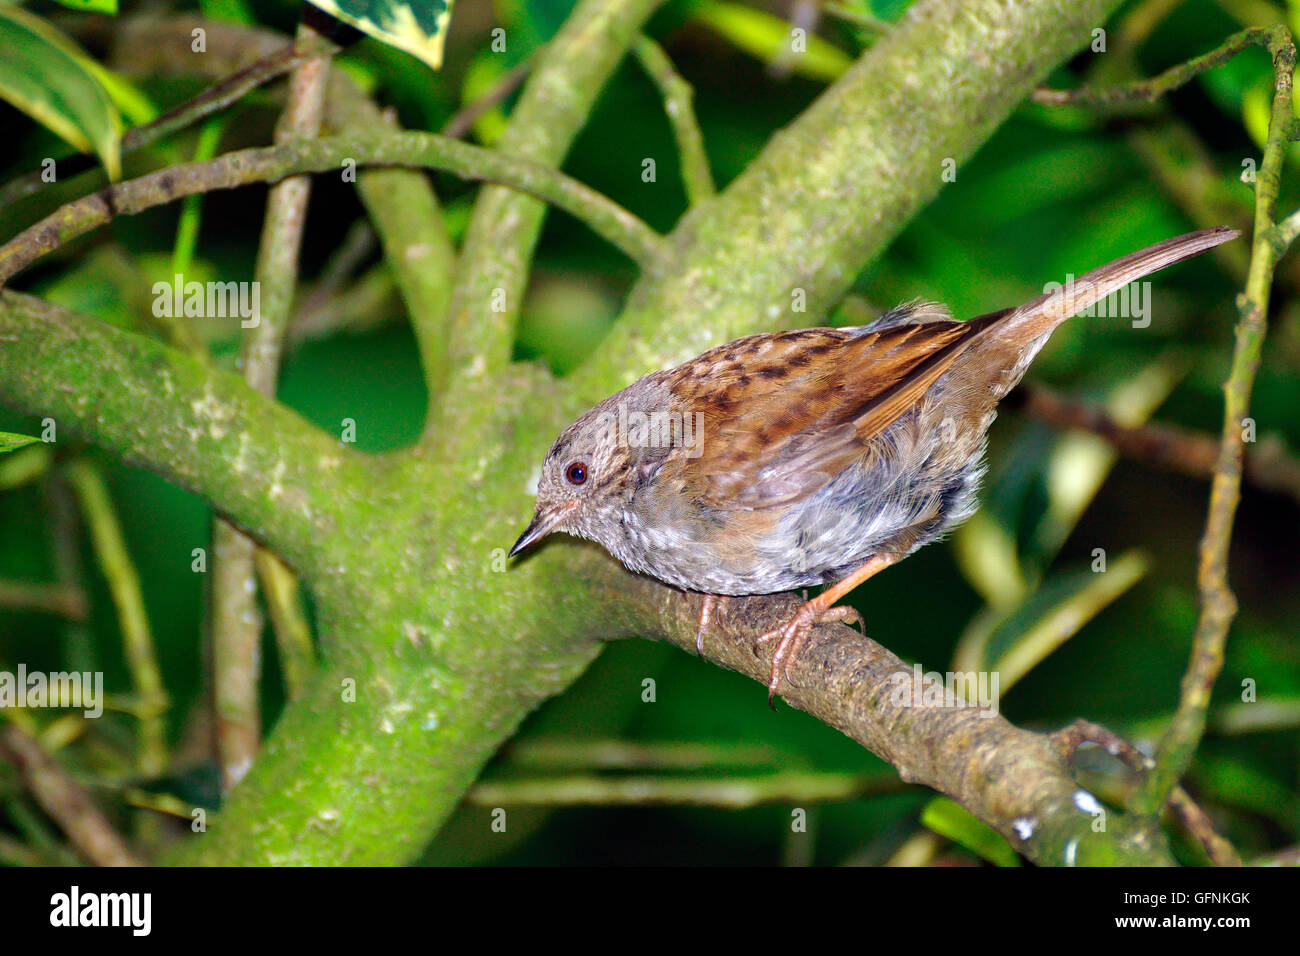 A WREN LOOKING FOR FOOD. Stock Photo